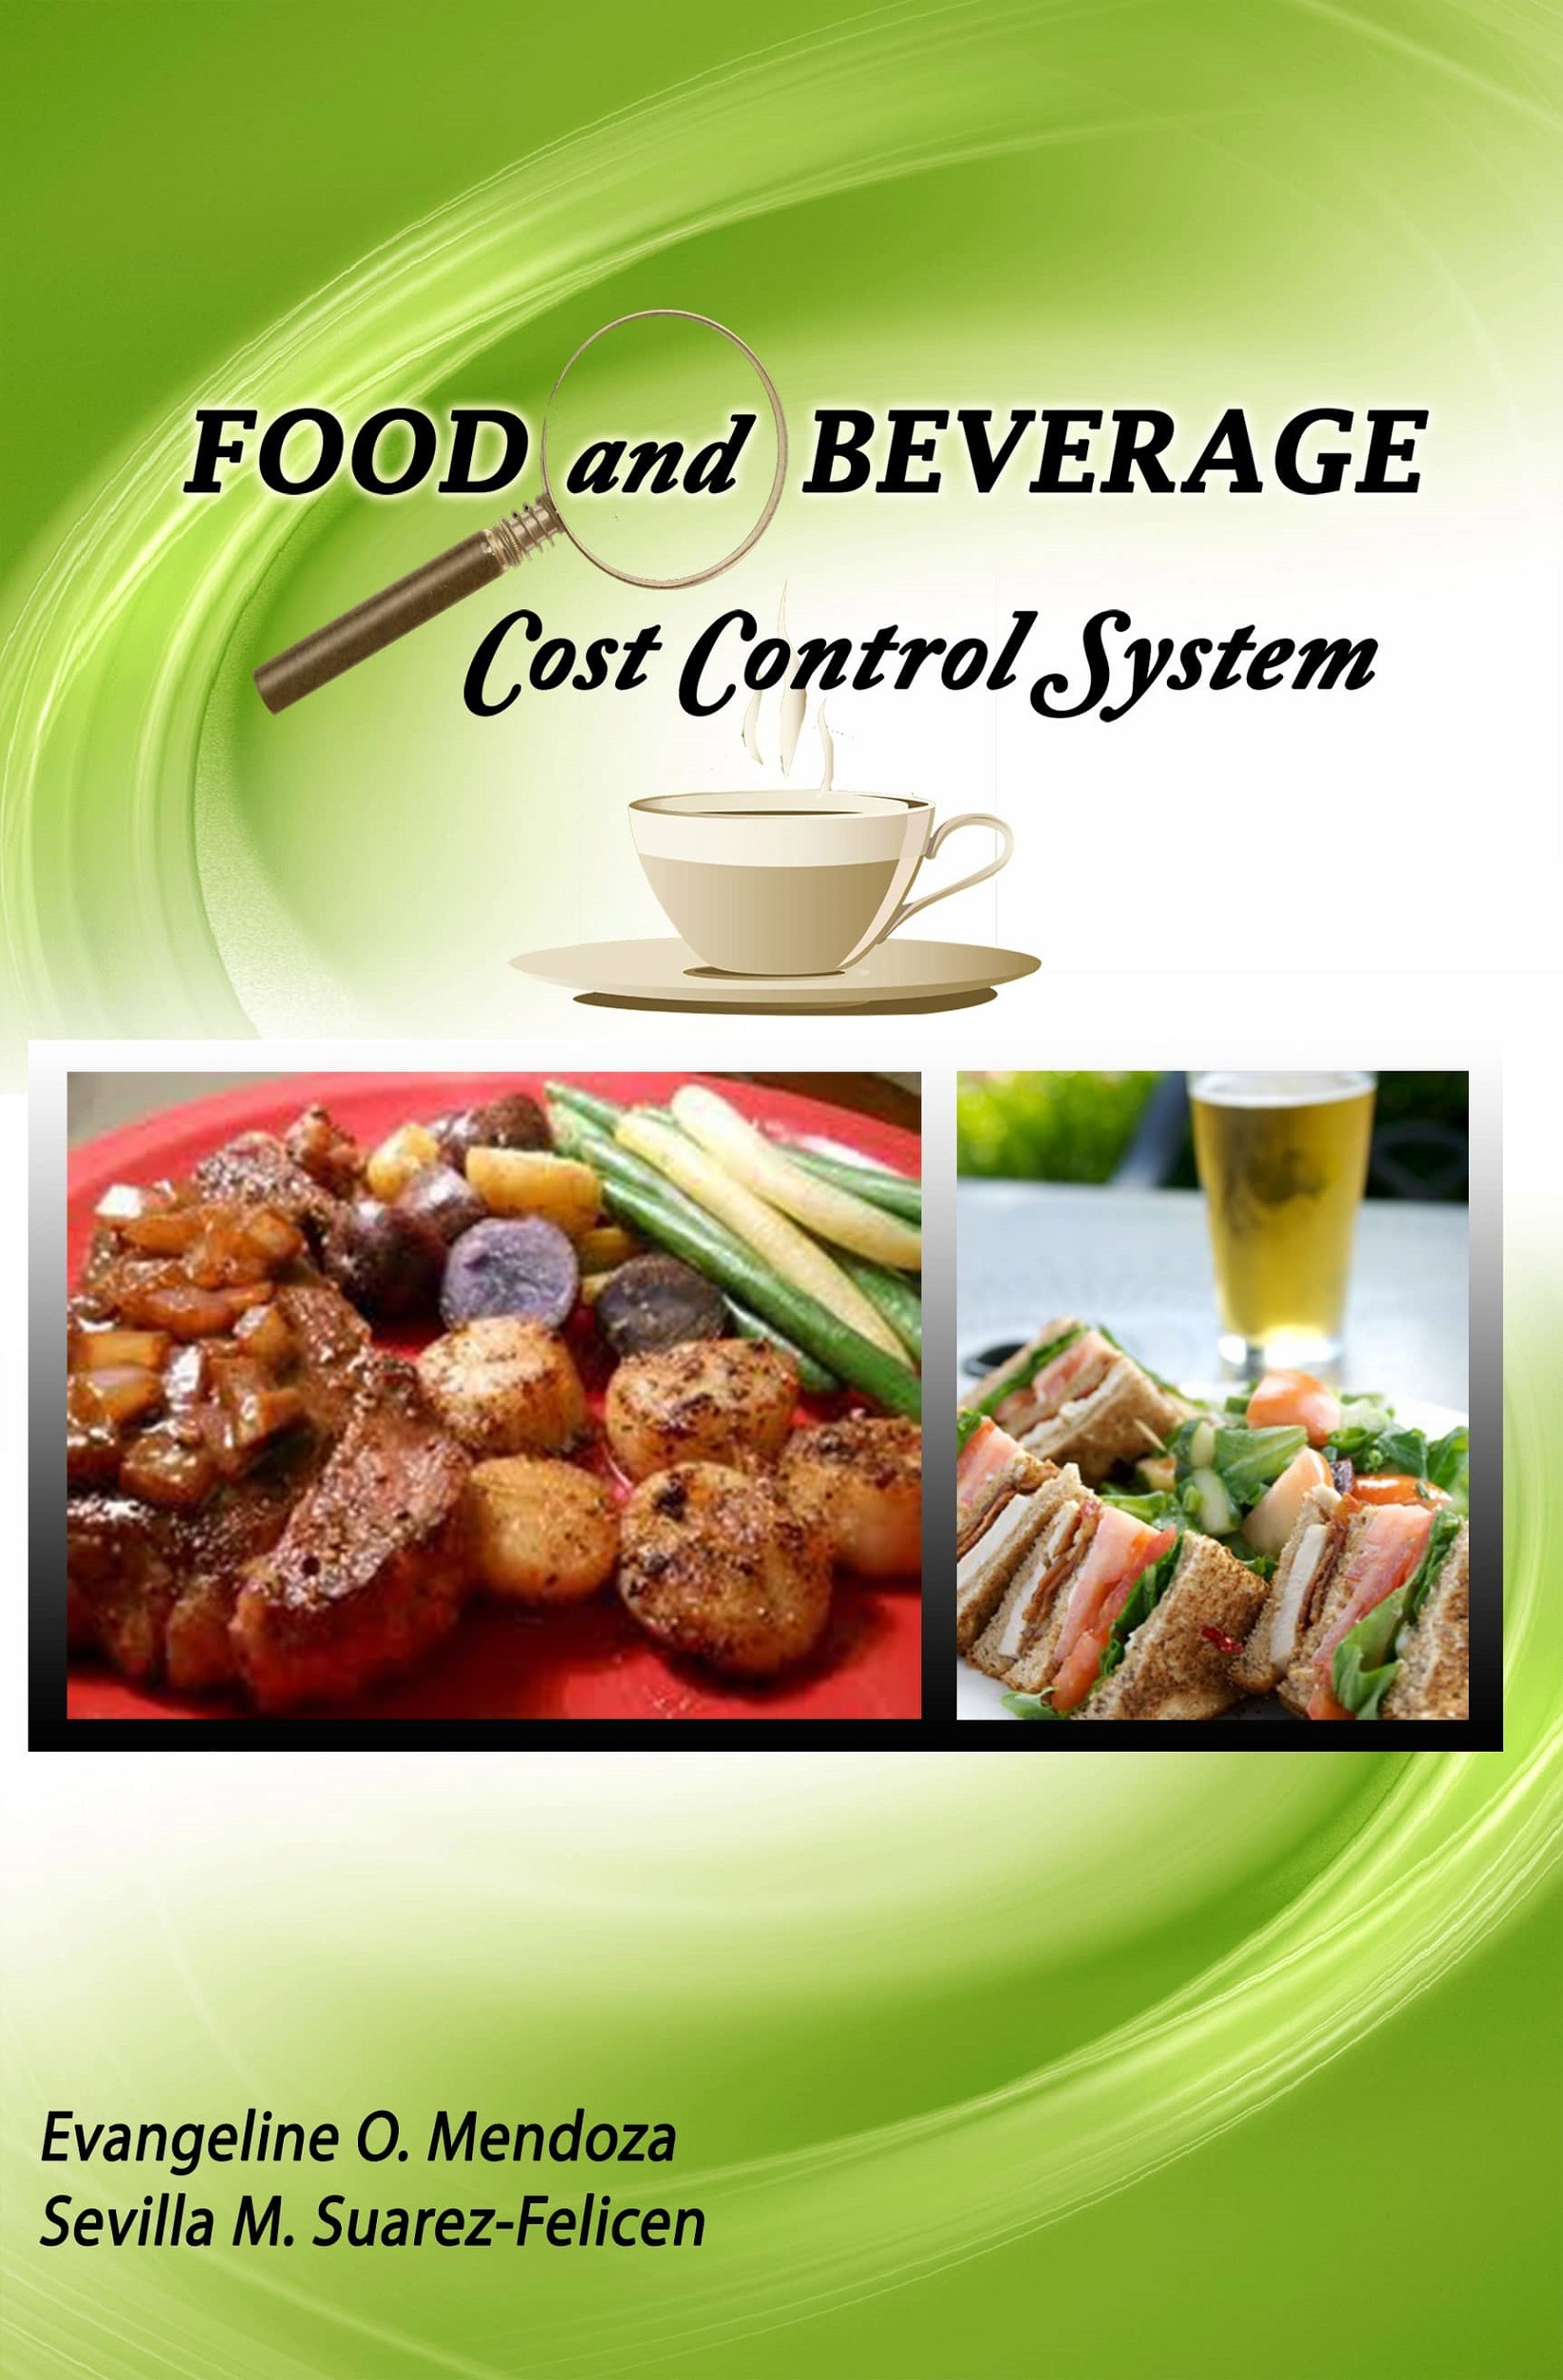 FOOD AND BEVERAGE (Cost Control System)